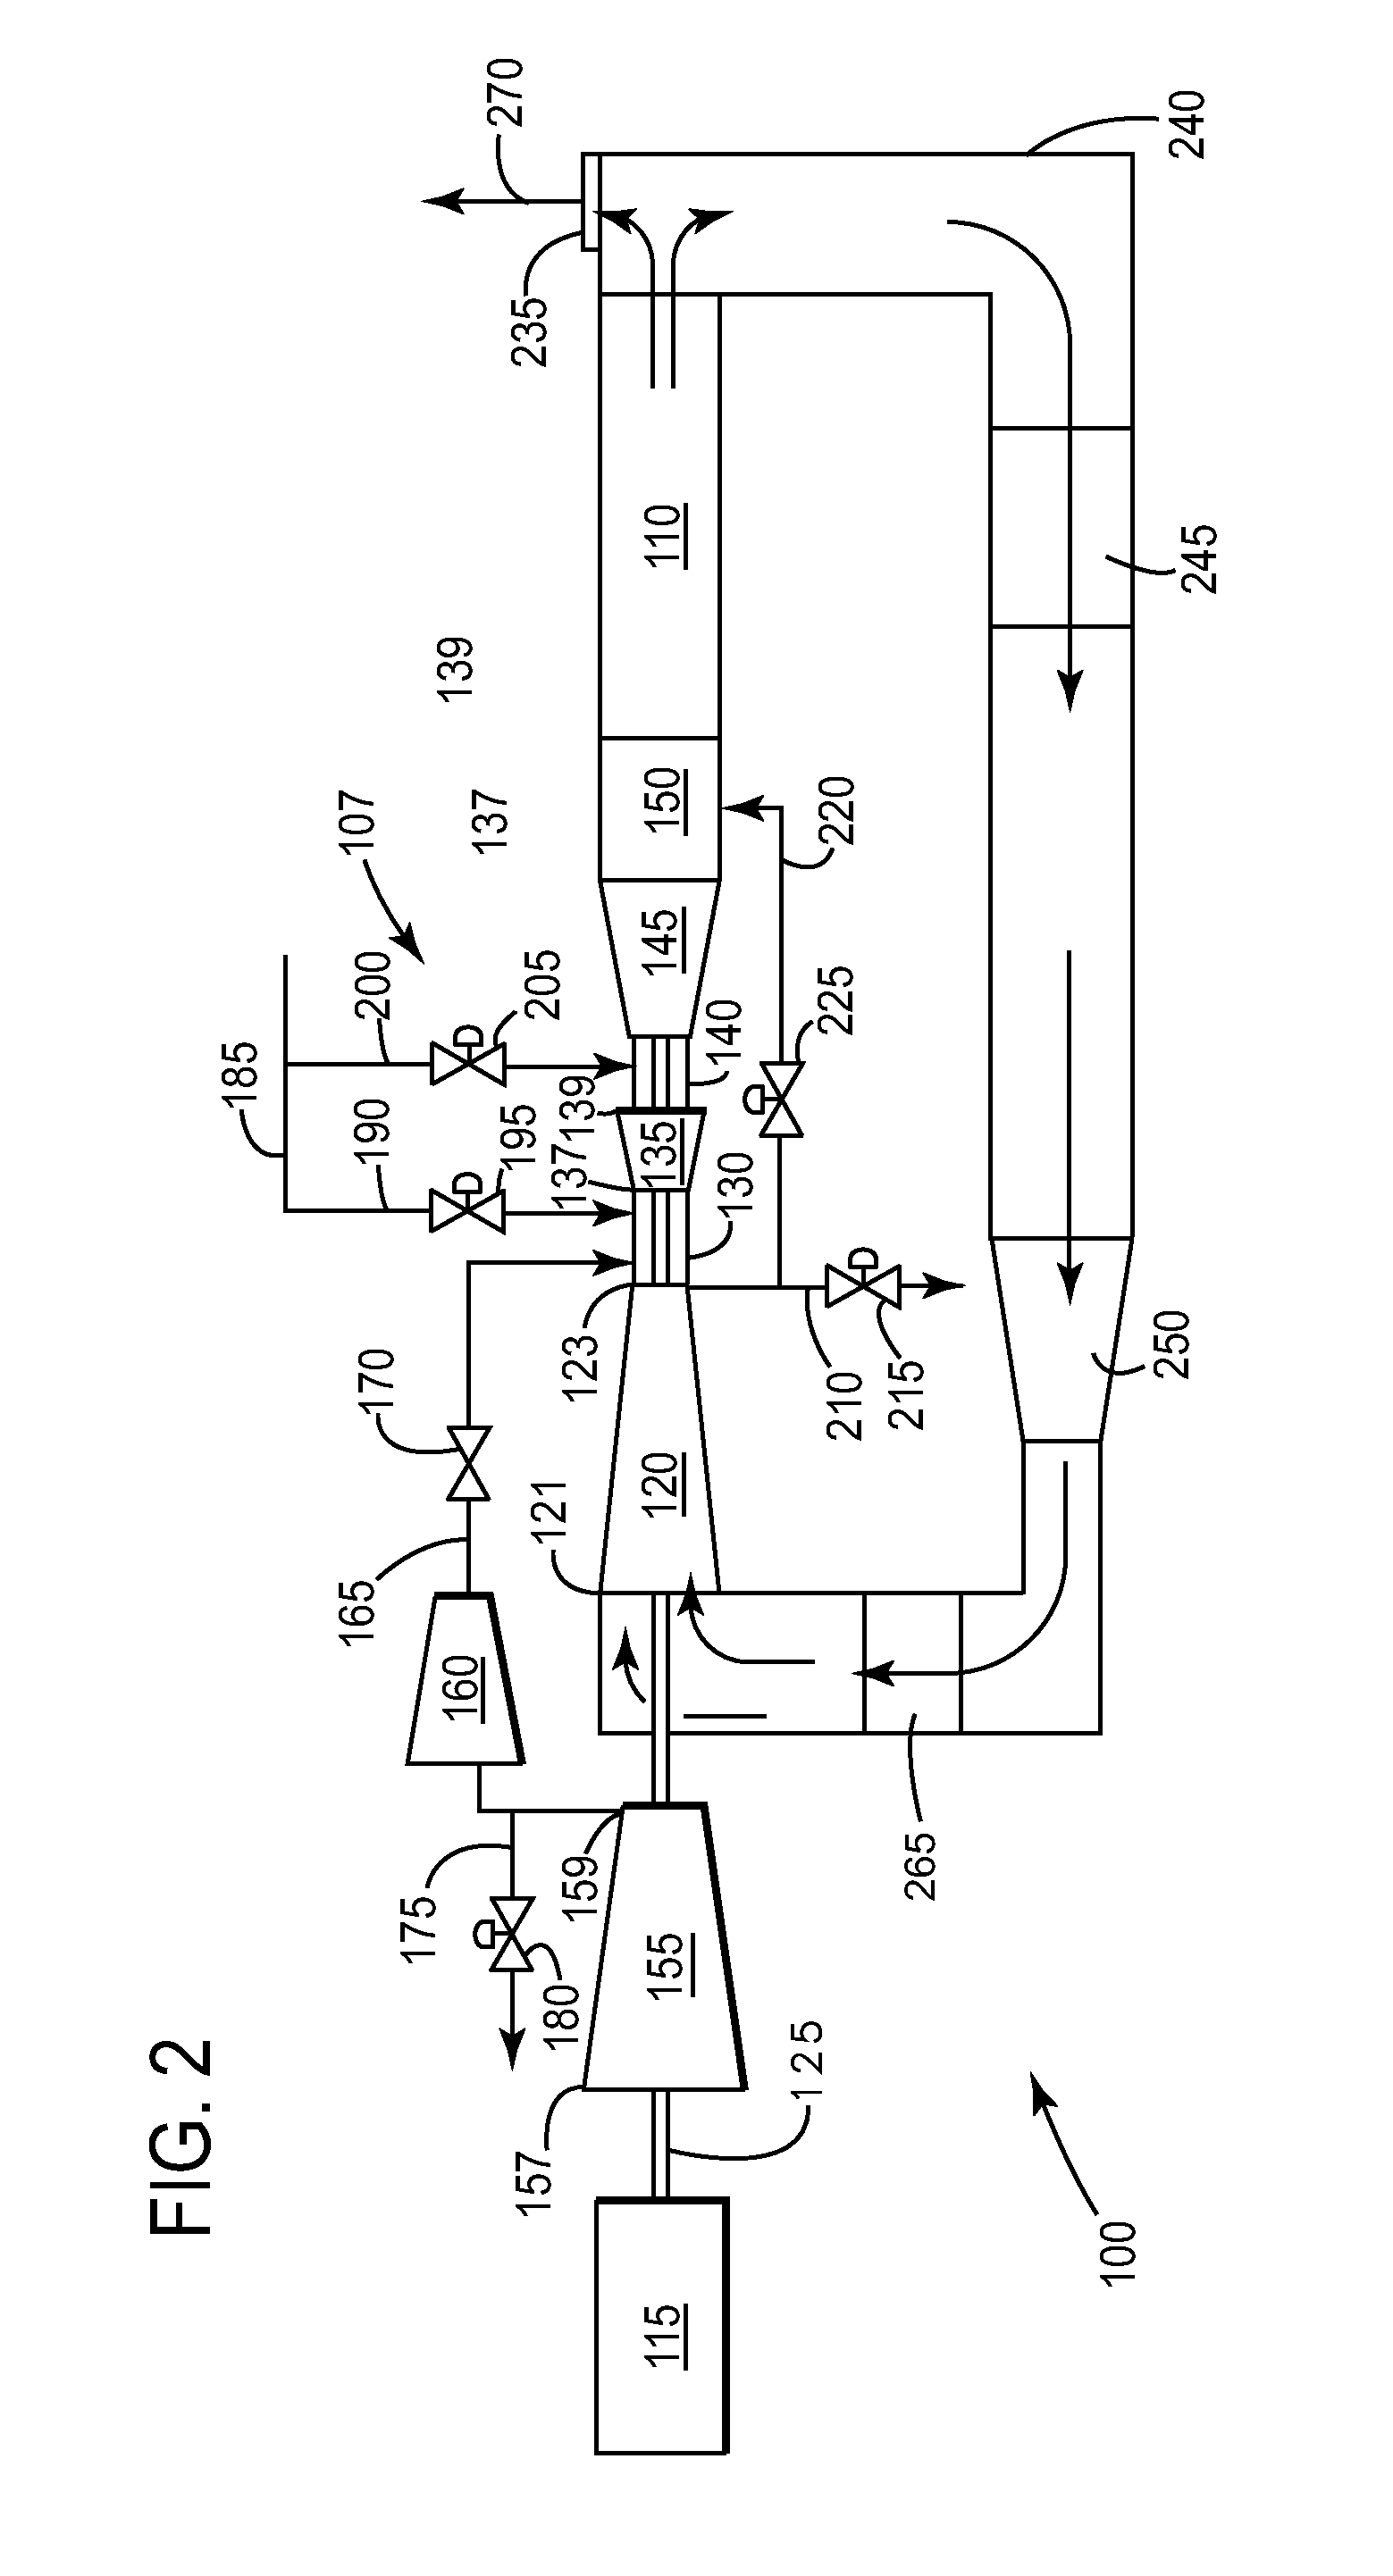 Method and system for controlling an extraction pressure and temperature of a stoichiometric egr system